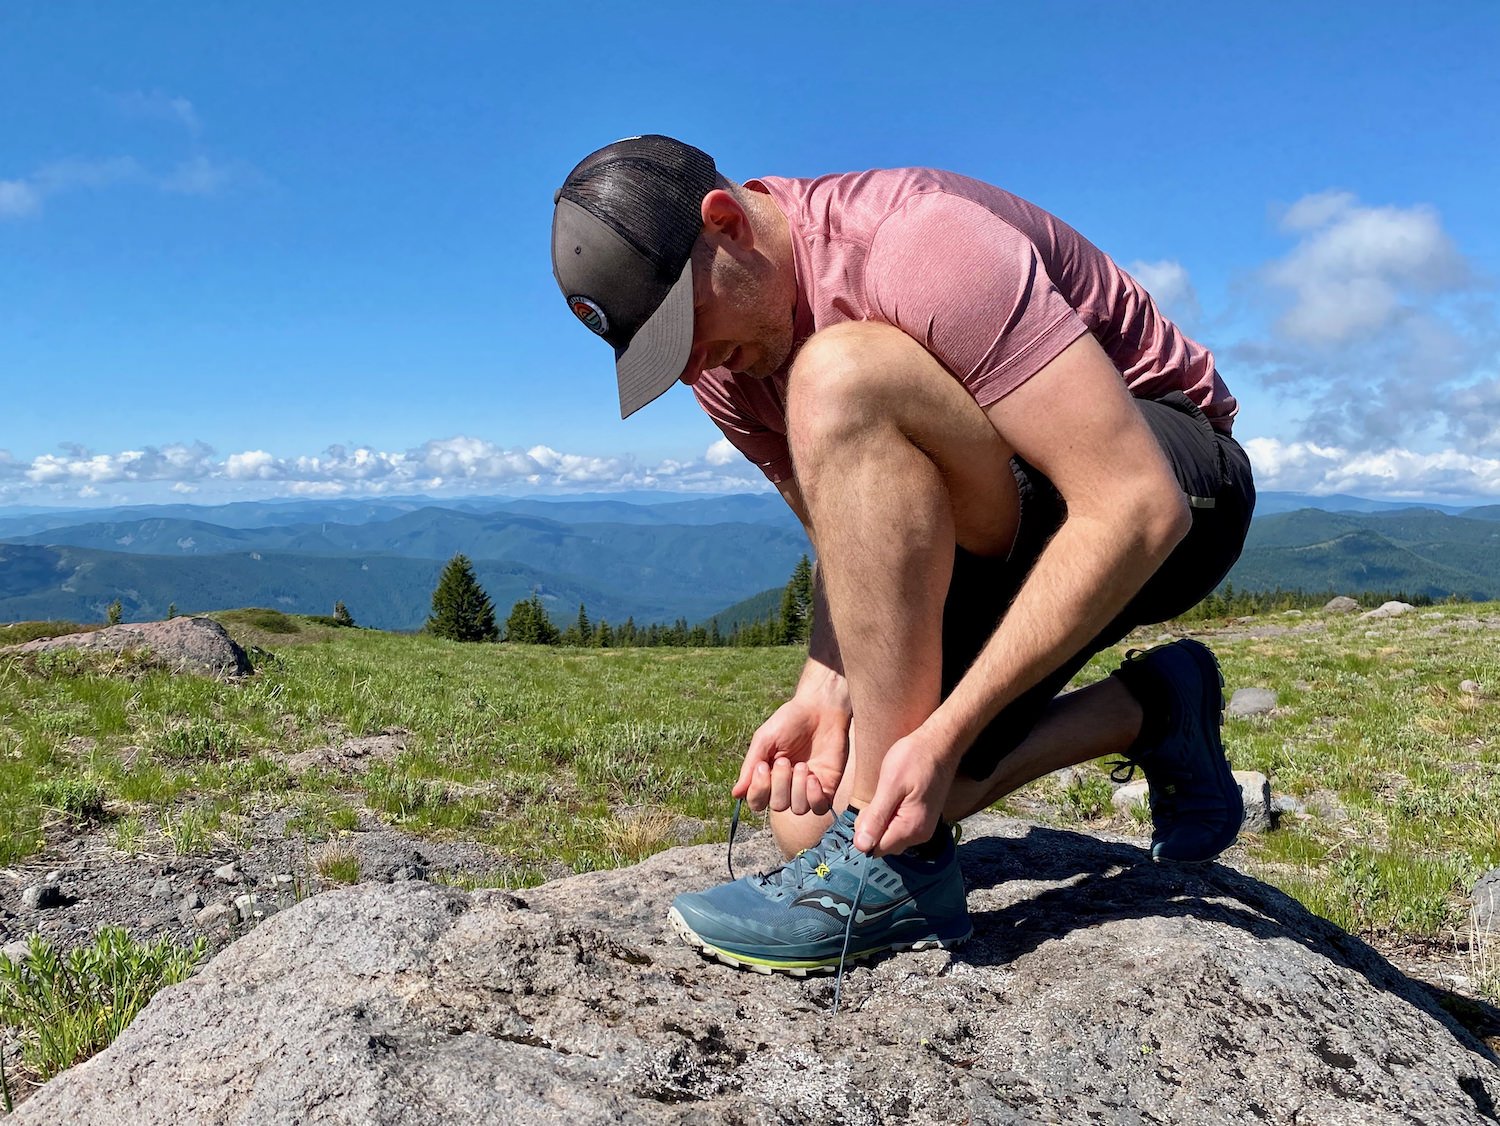 A hiker tying his shoe with an expansive valley view in the background